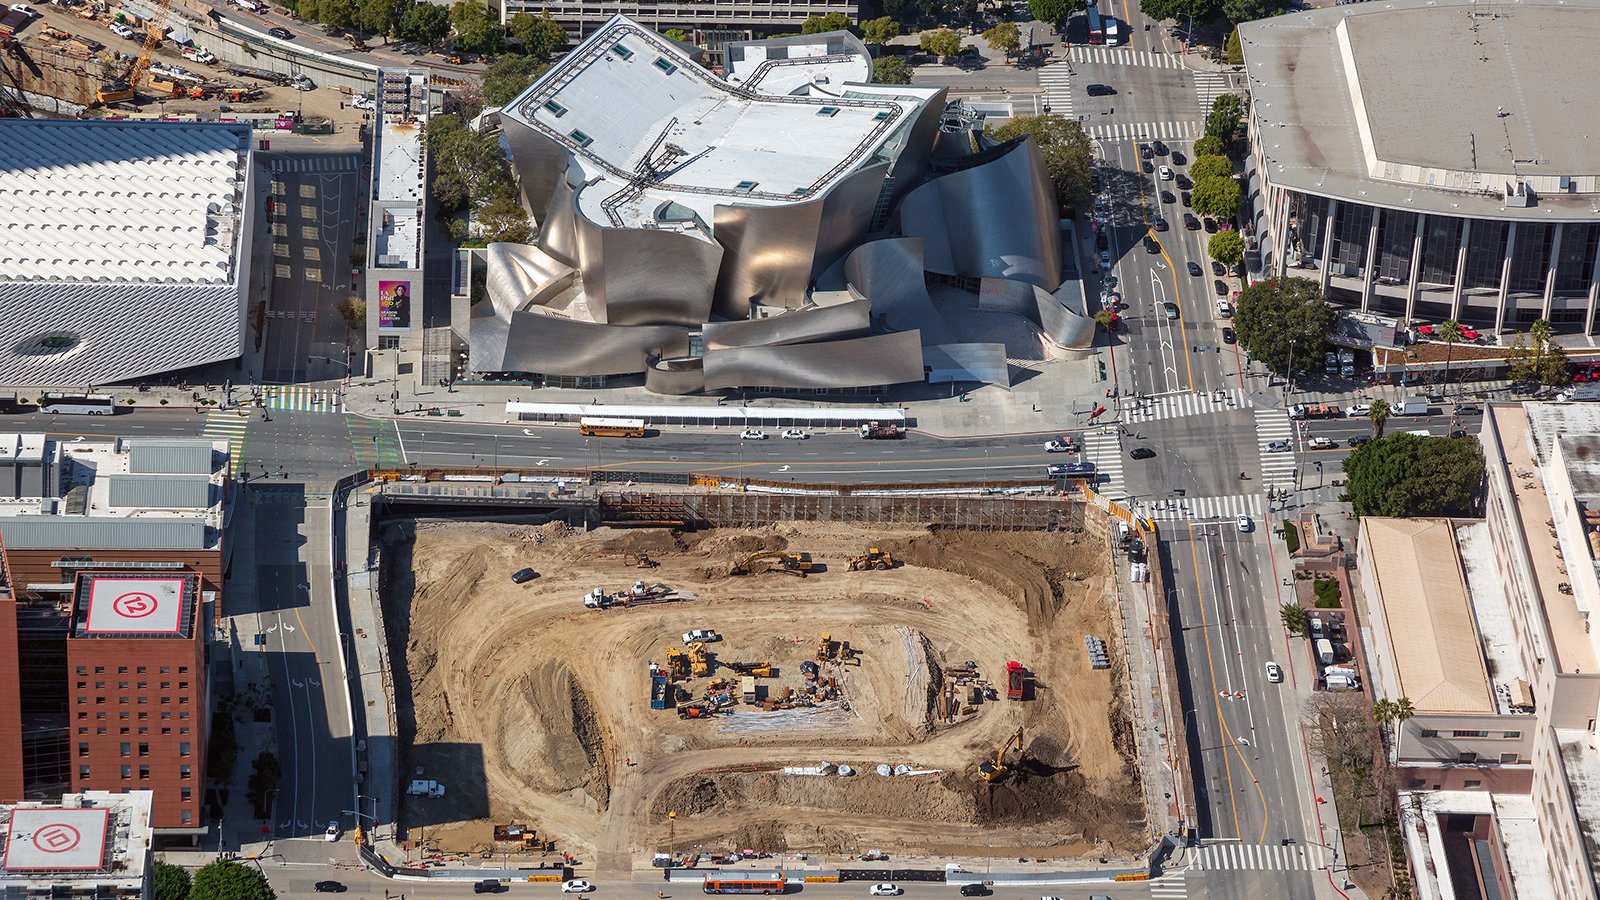 Aerial blog photo of DTLA's The Grand construction, which is across the street from the Walt Disney Center, The Broad, and the Dorothy Chandler Pavilion